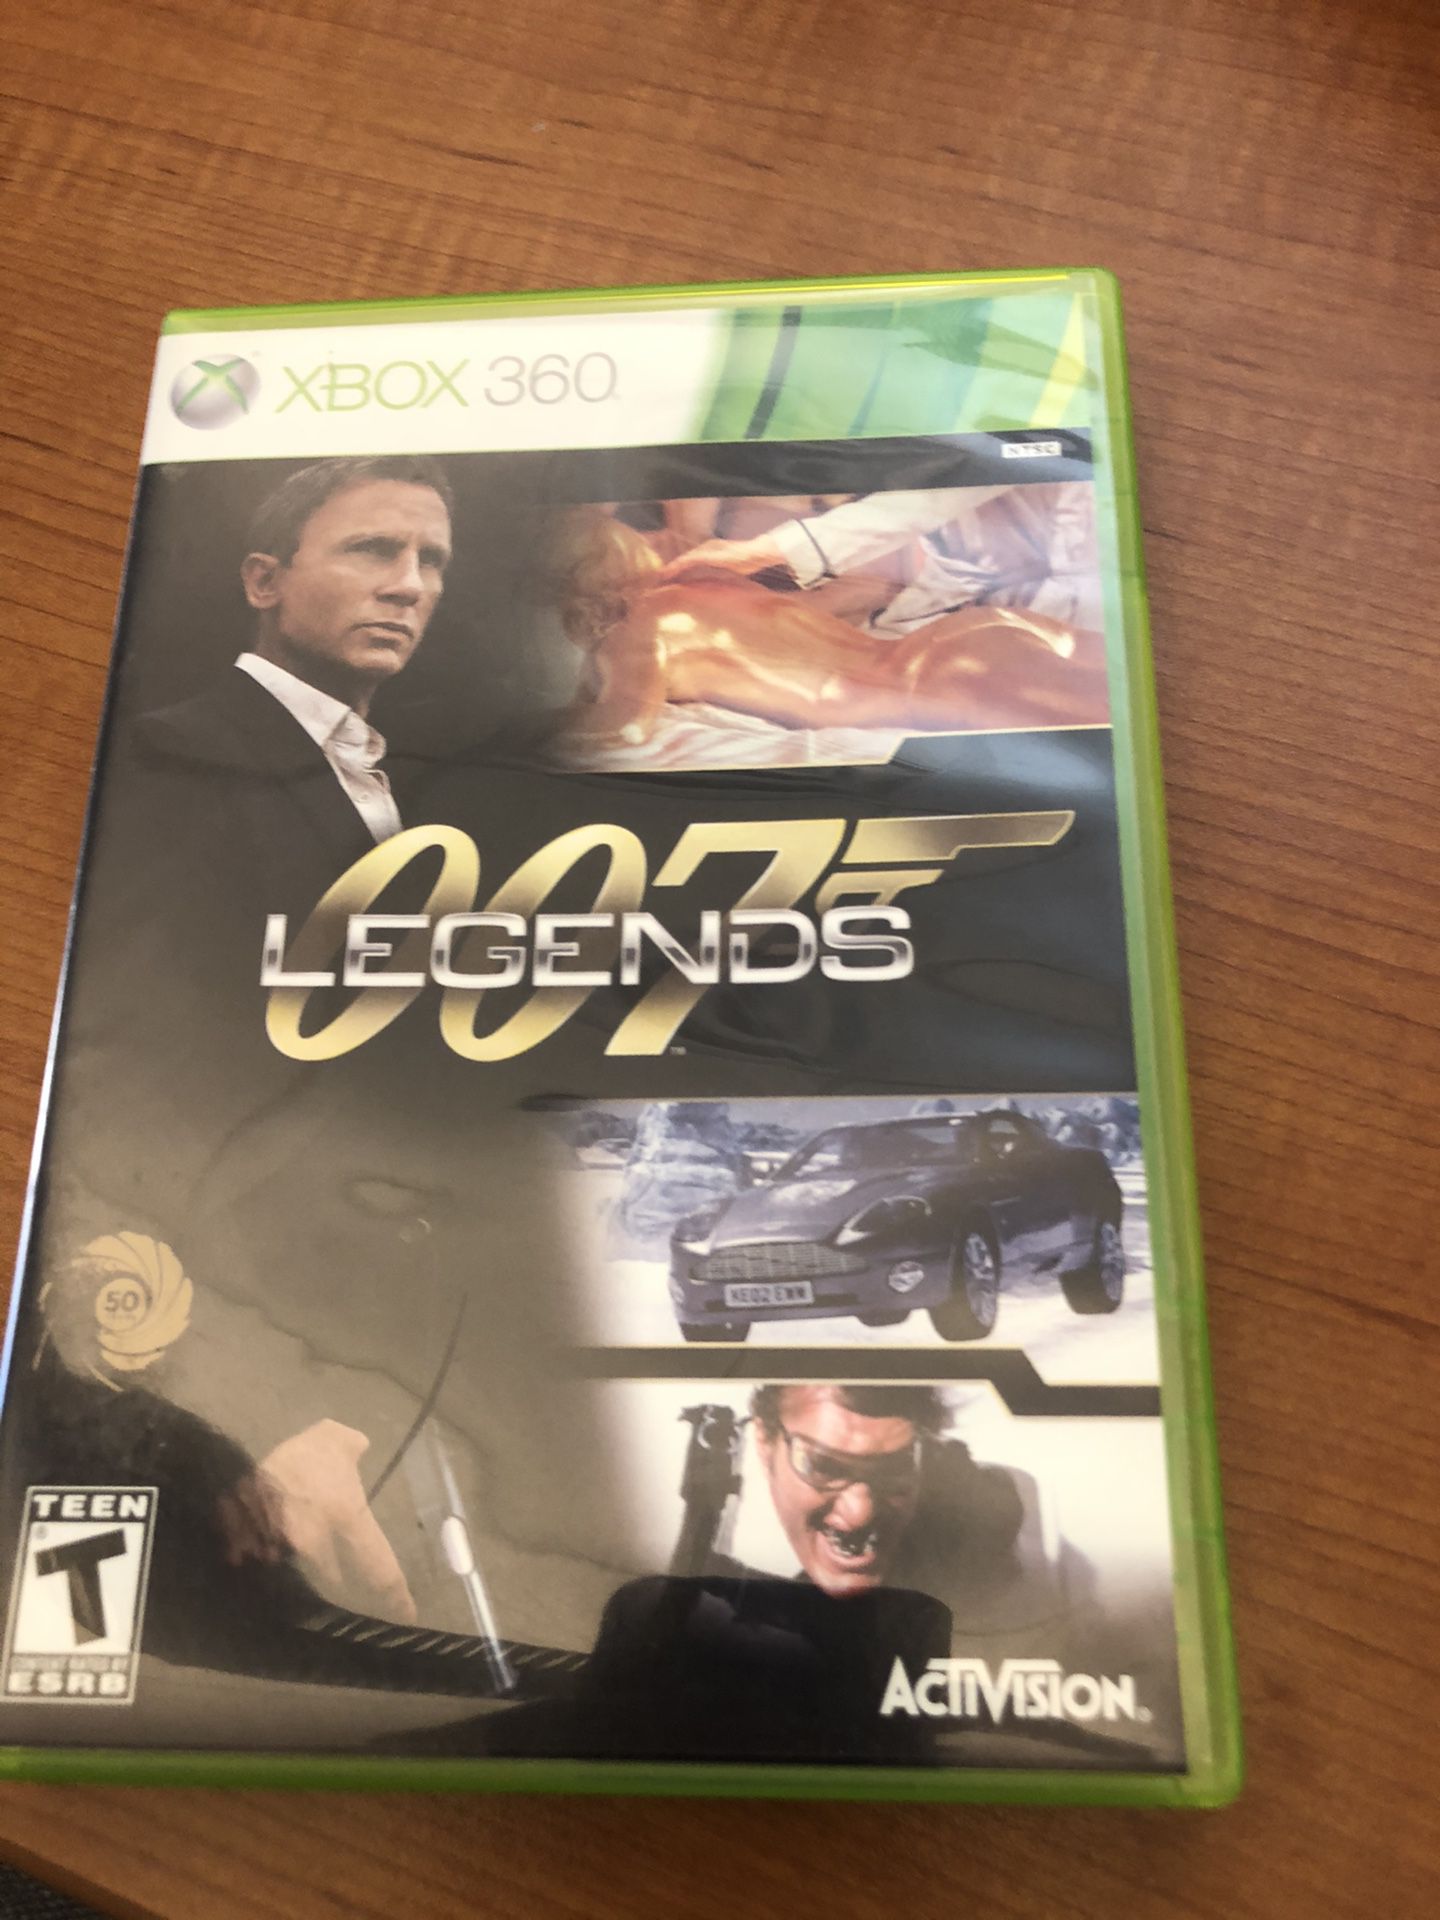 Xbox 360 0007Legends Game